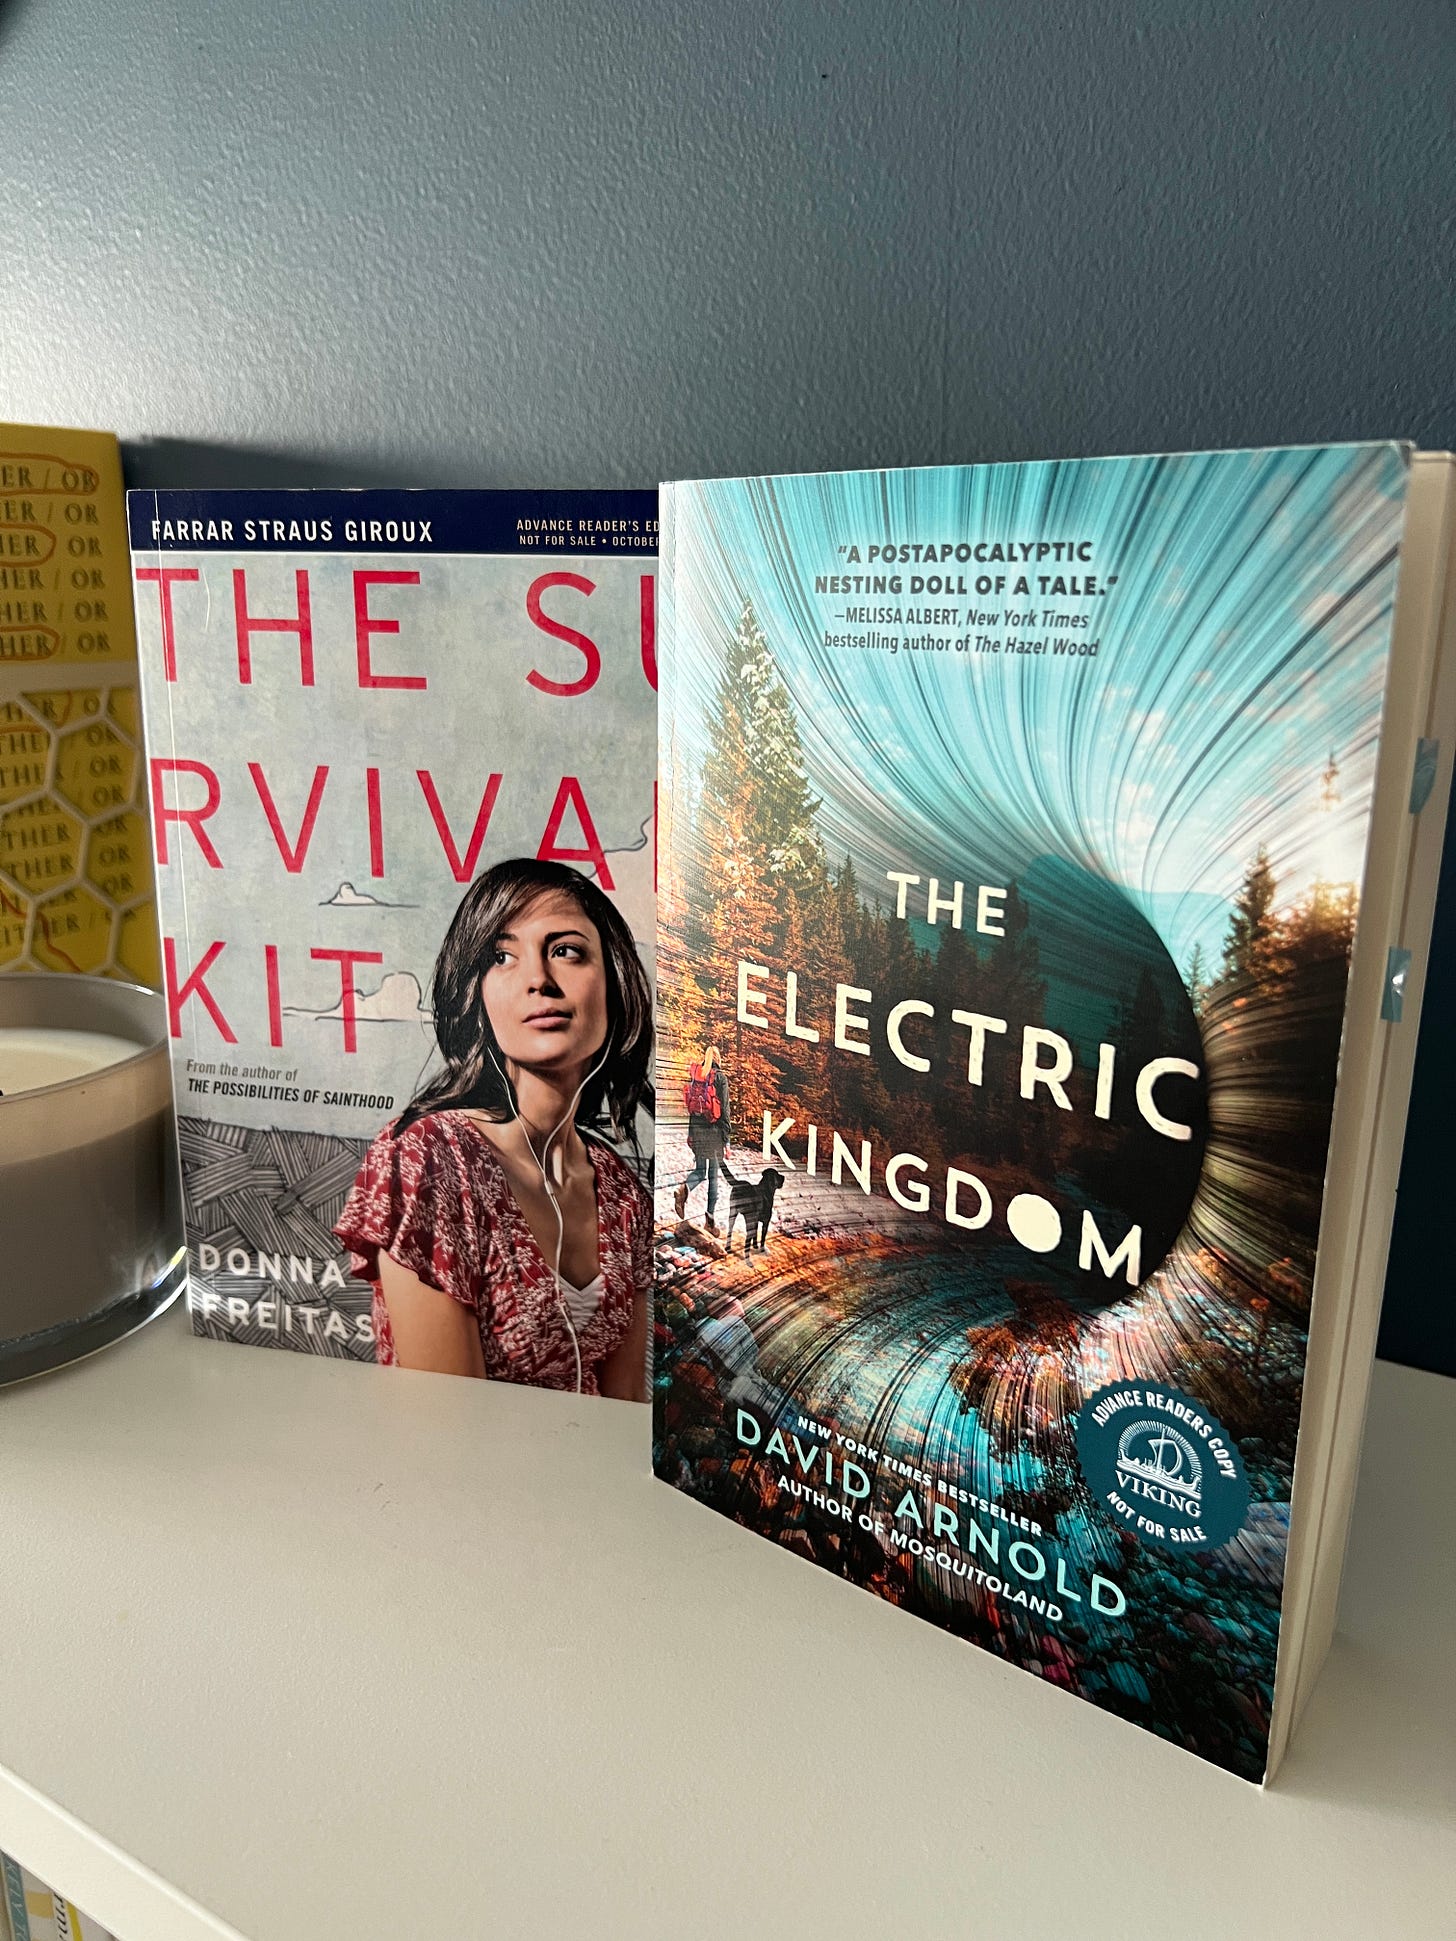 An ARC of The Survival Kit and an ARC of The Electric Kingdom propped up on top of a white bookshelf.